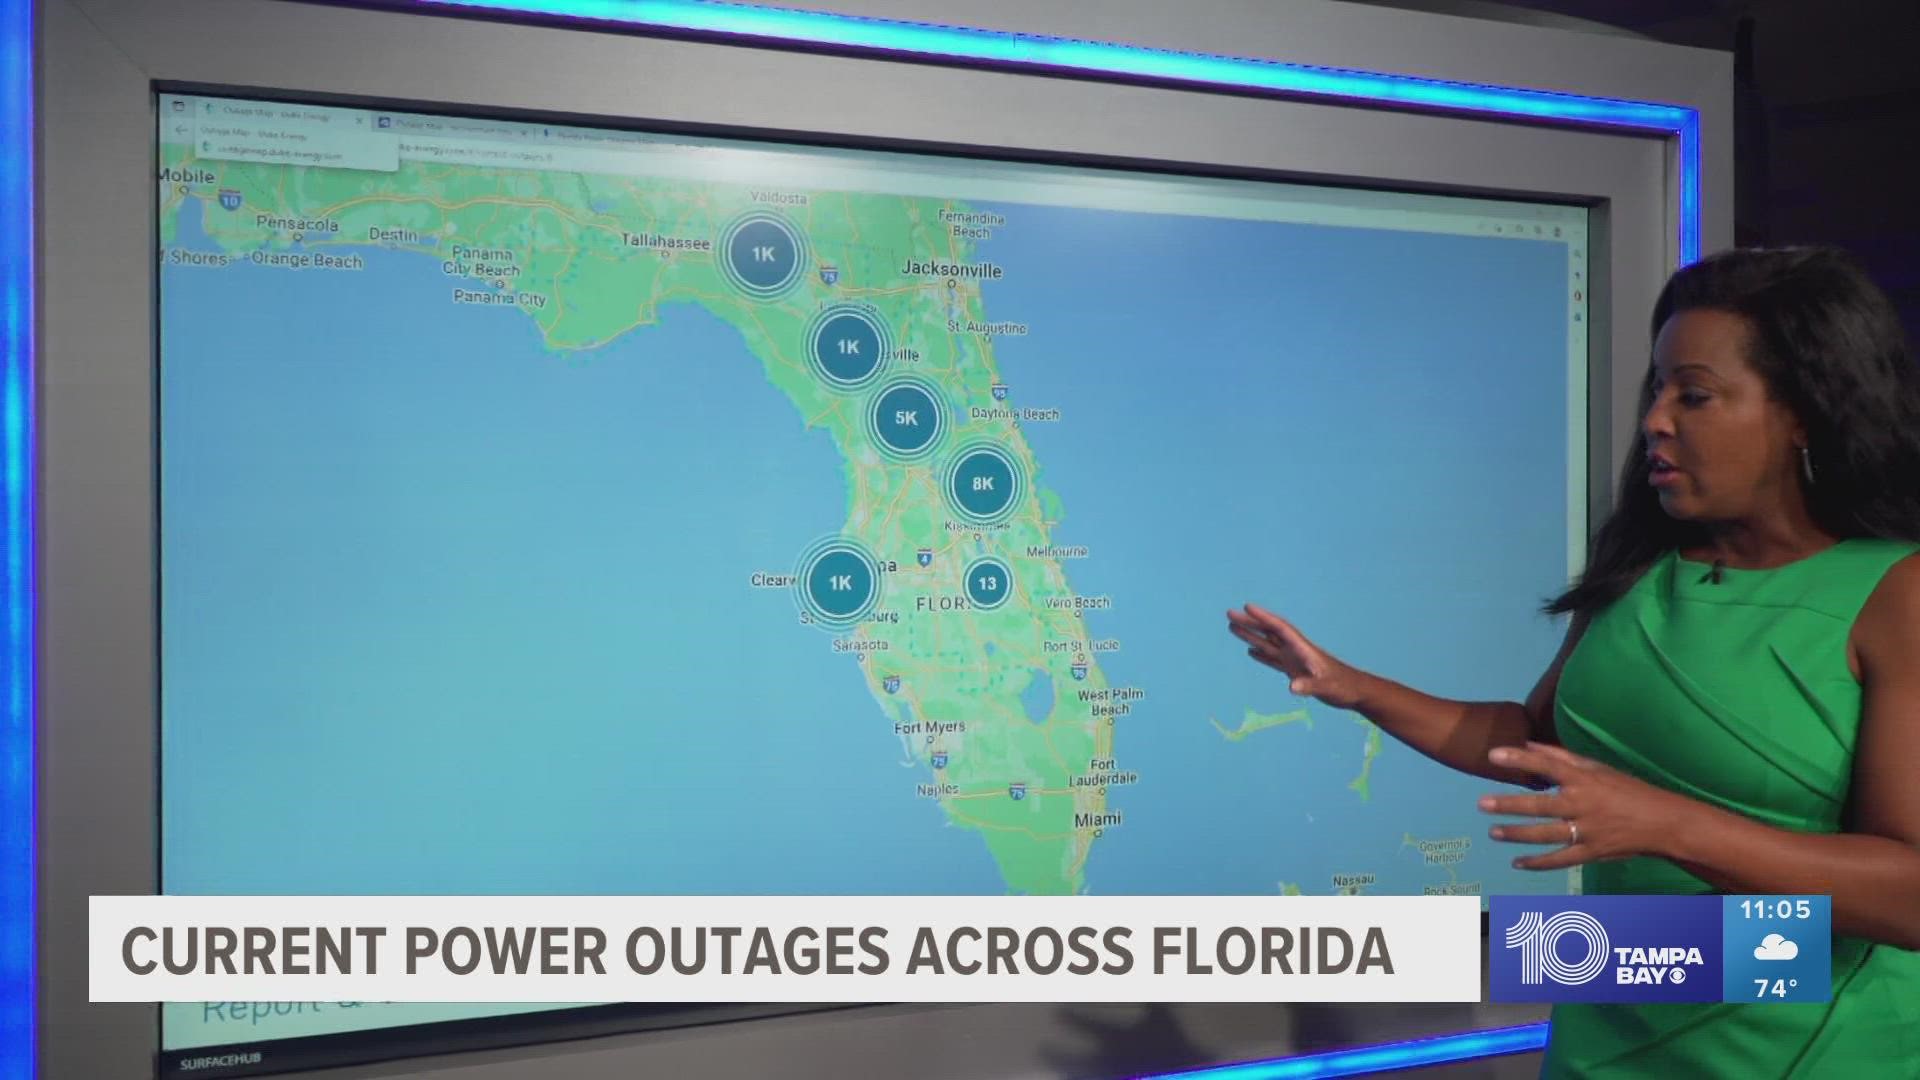 Most power outages are reported on Florida's east coast.